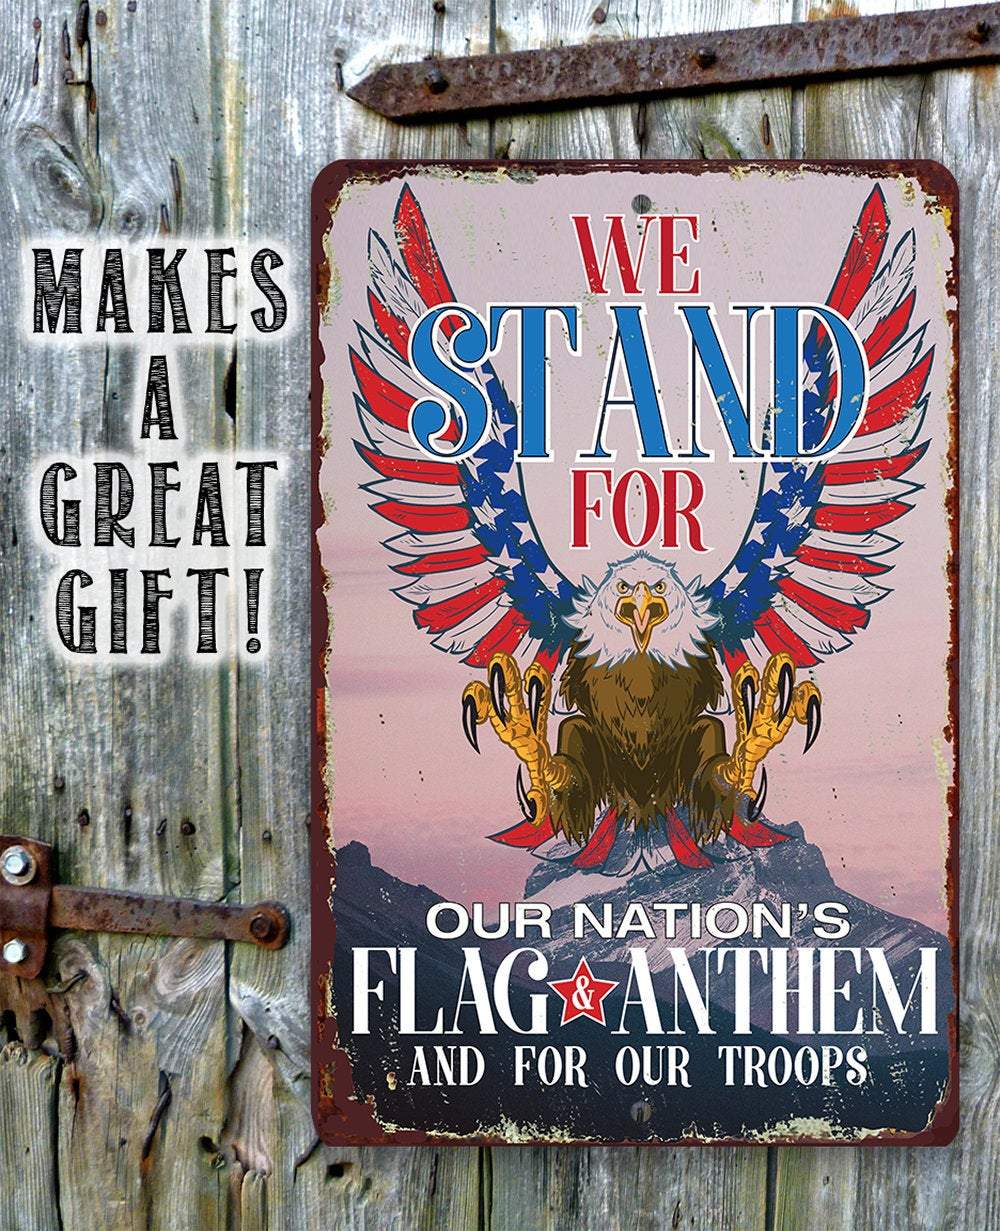 We Stand For Our Nation - Metal Sign | Lone Star Art.